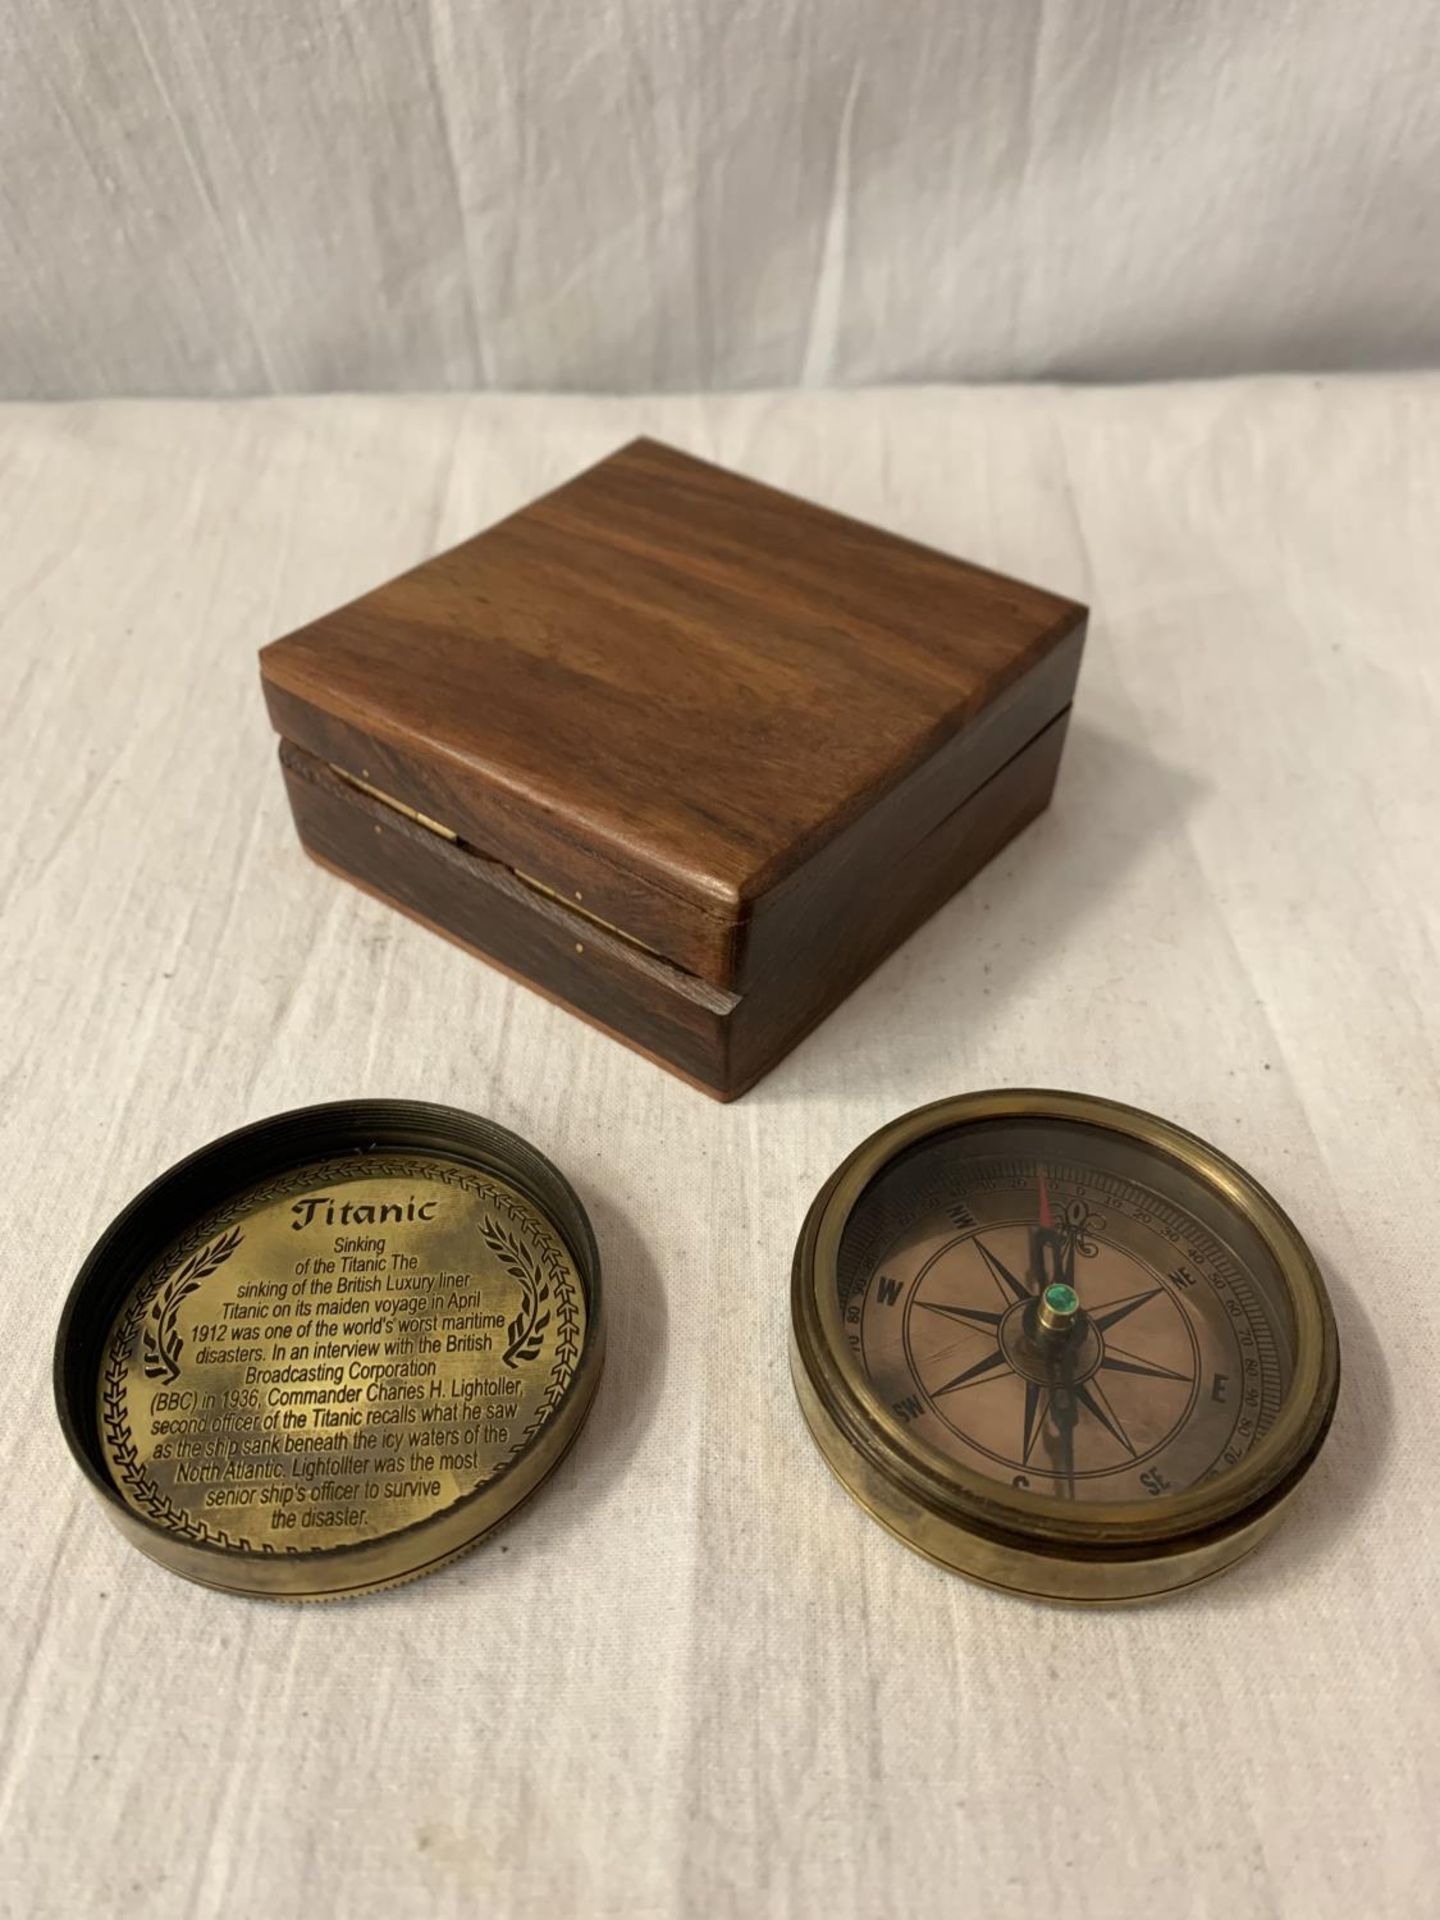 A BOXED BRASS 'WHITE STAR LINE' COMPASS - Image 4 of 4